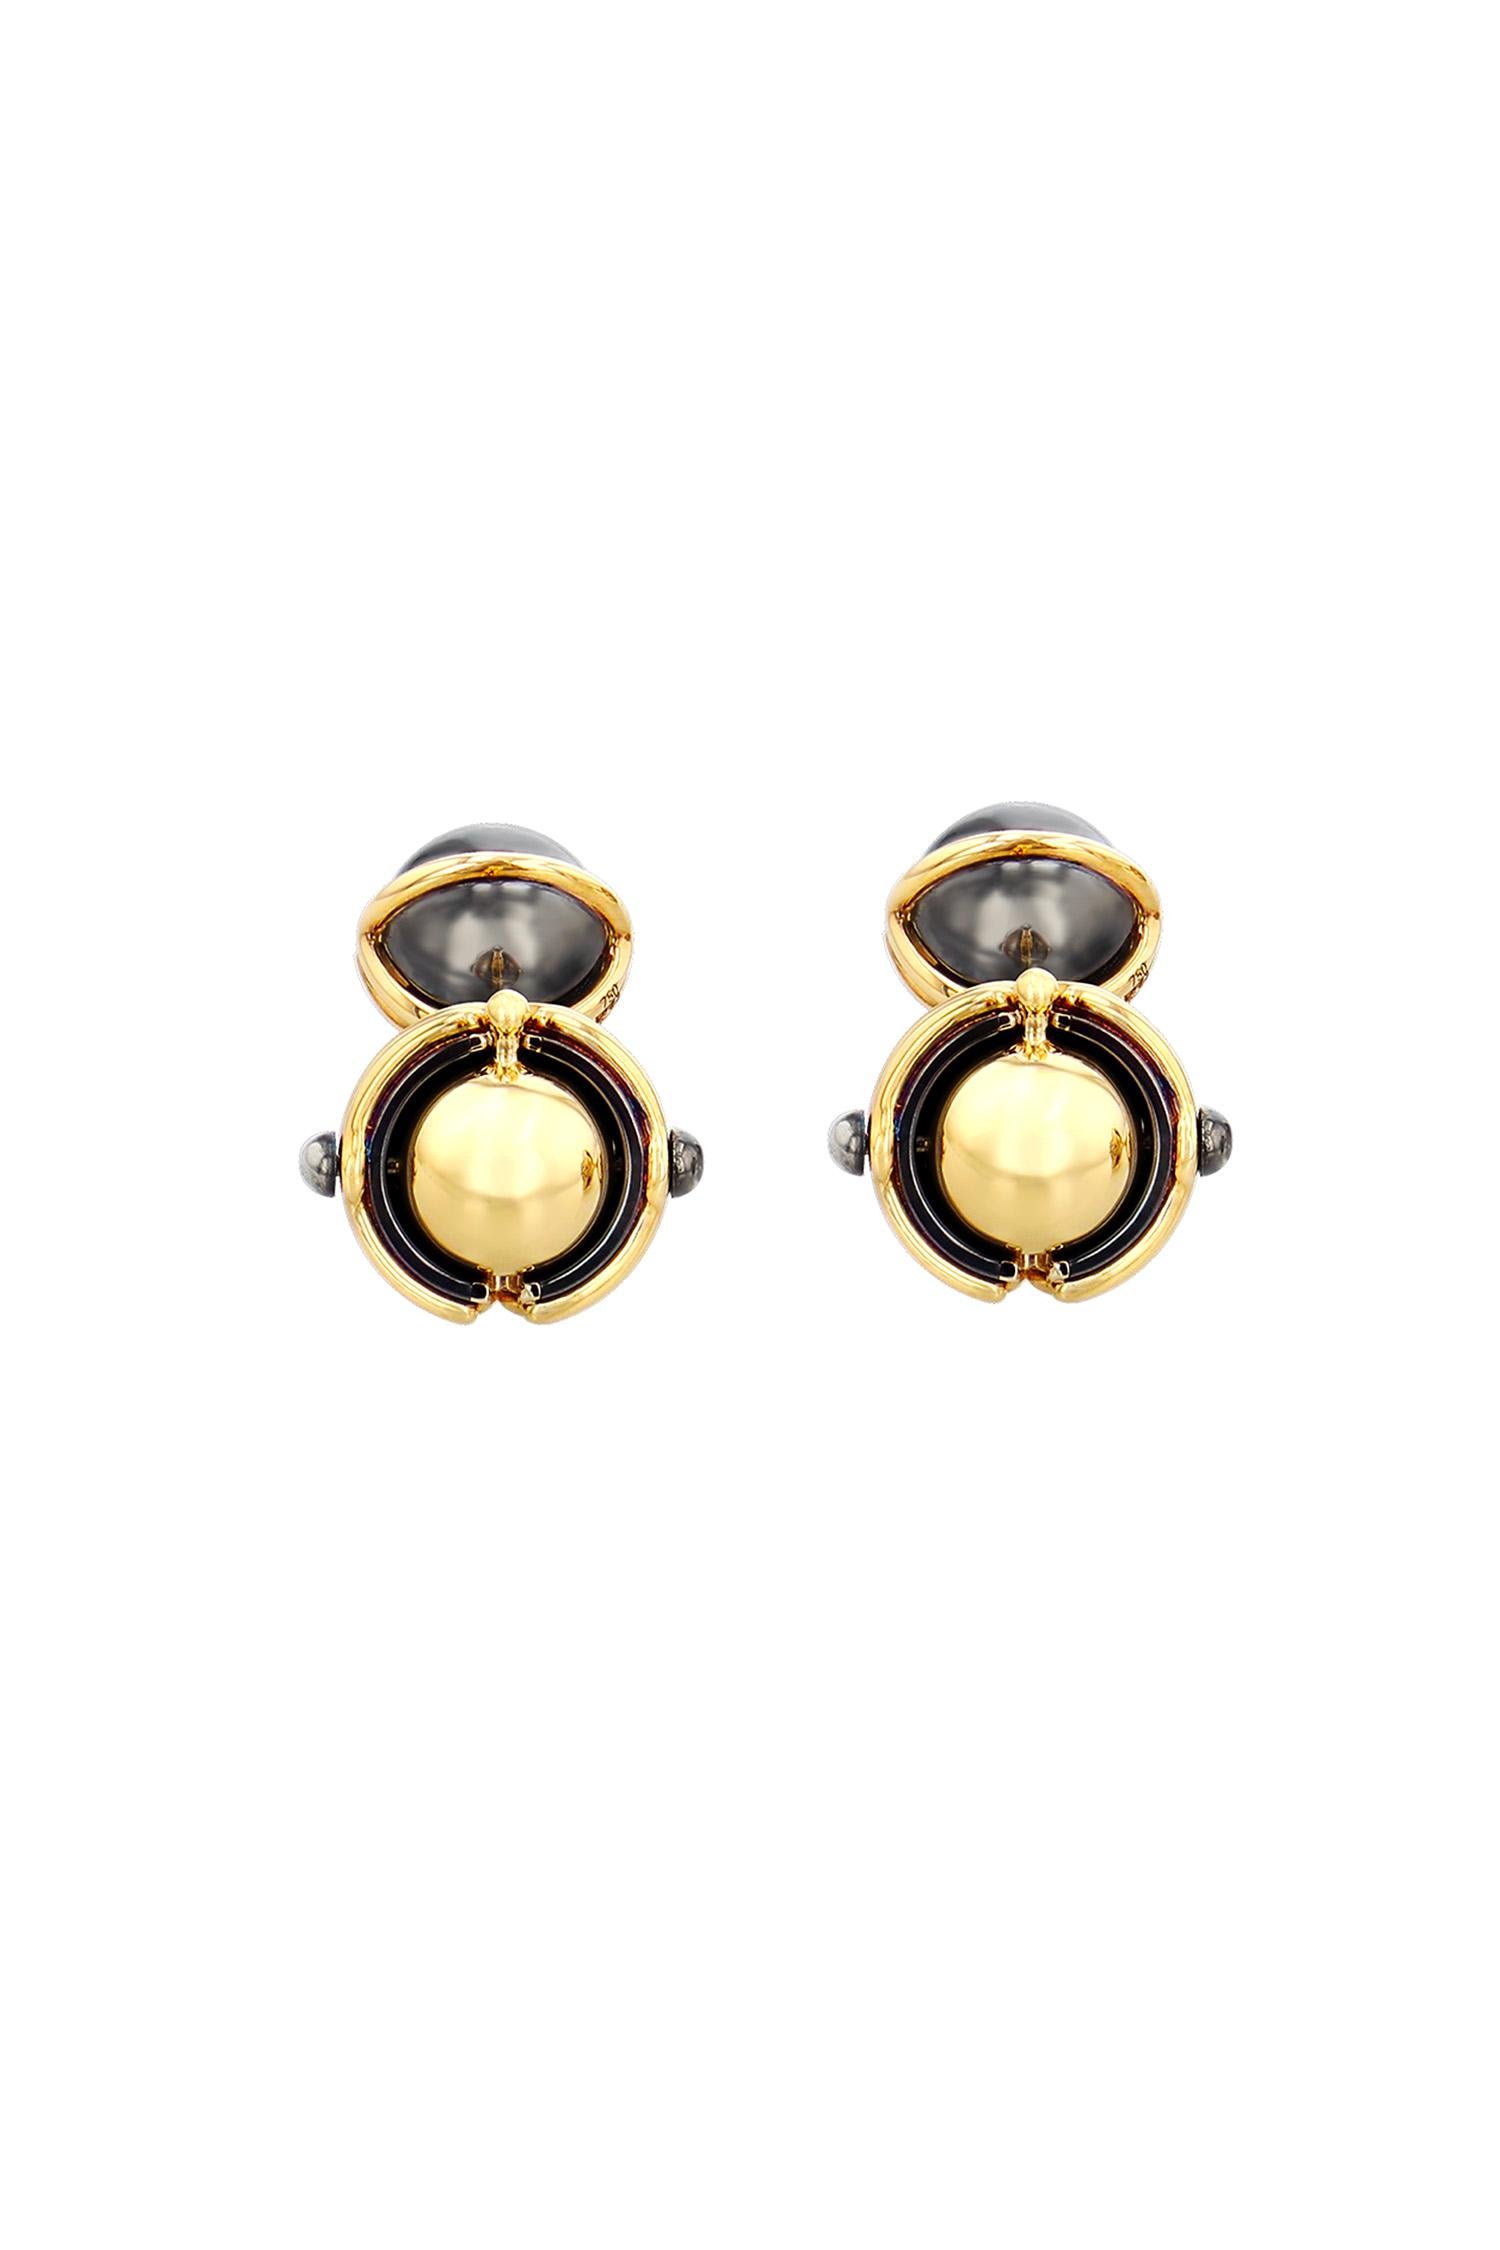 Neoclassical Diamond Mira Cufflinks in 18k Yellow Gold by Elie Top For Sale